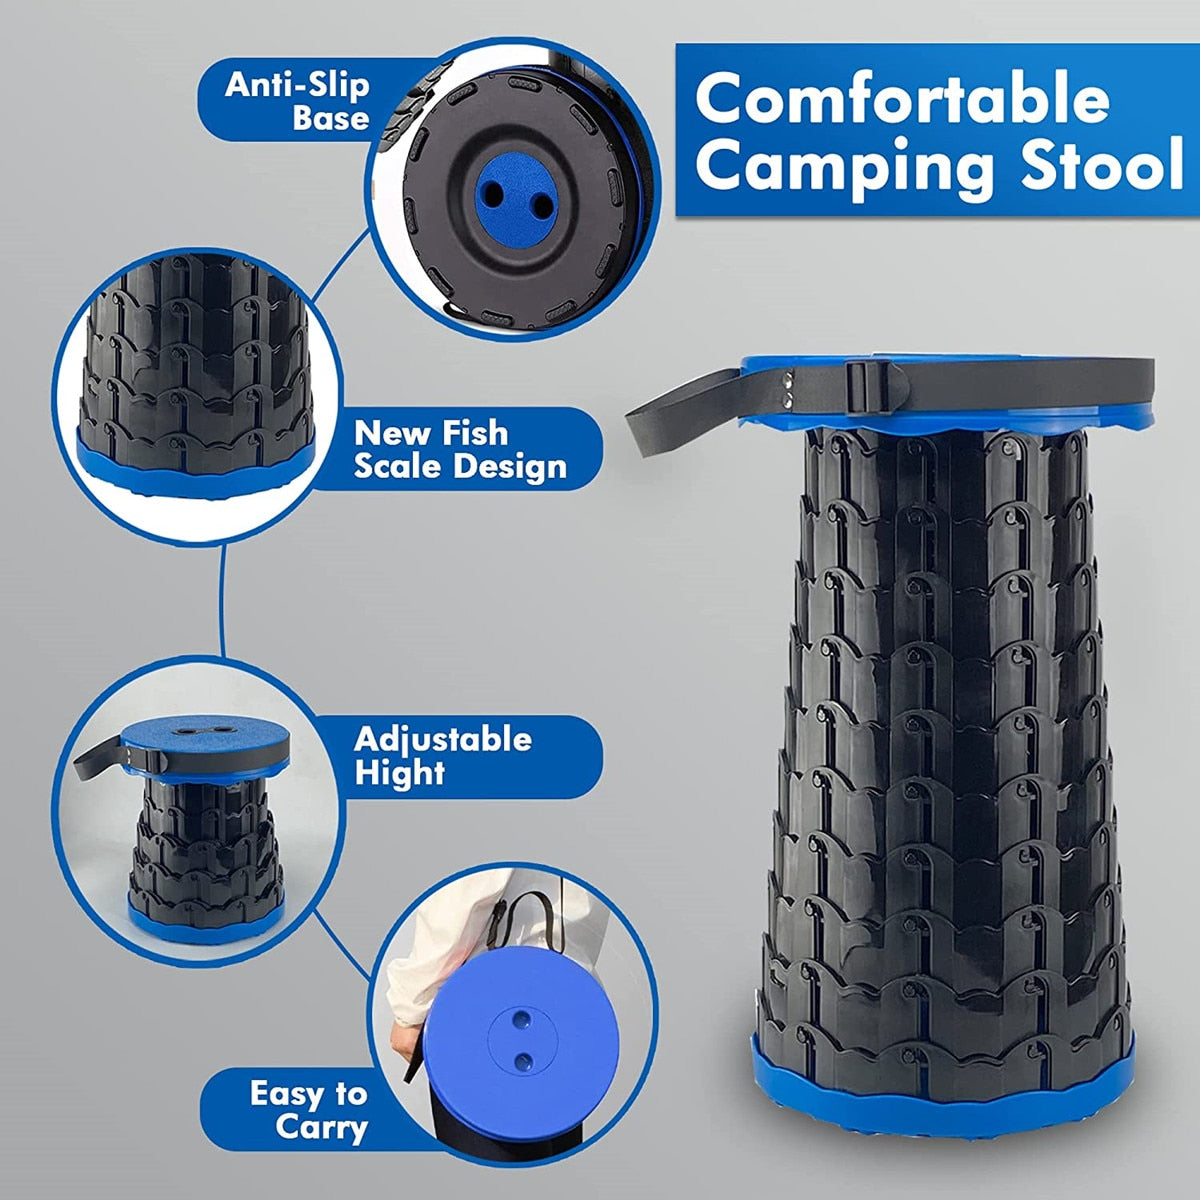 Adjustable Folding Retractable Stool - Portable, Lightweight Travel & Camping Stool Chair